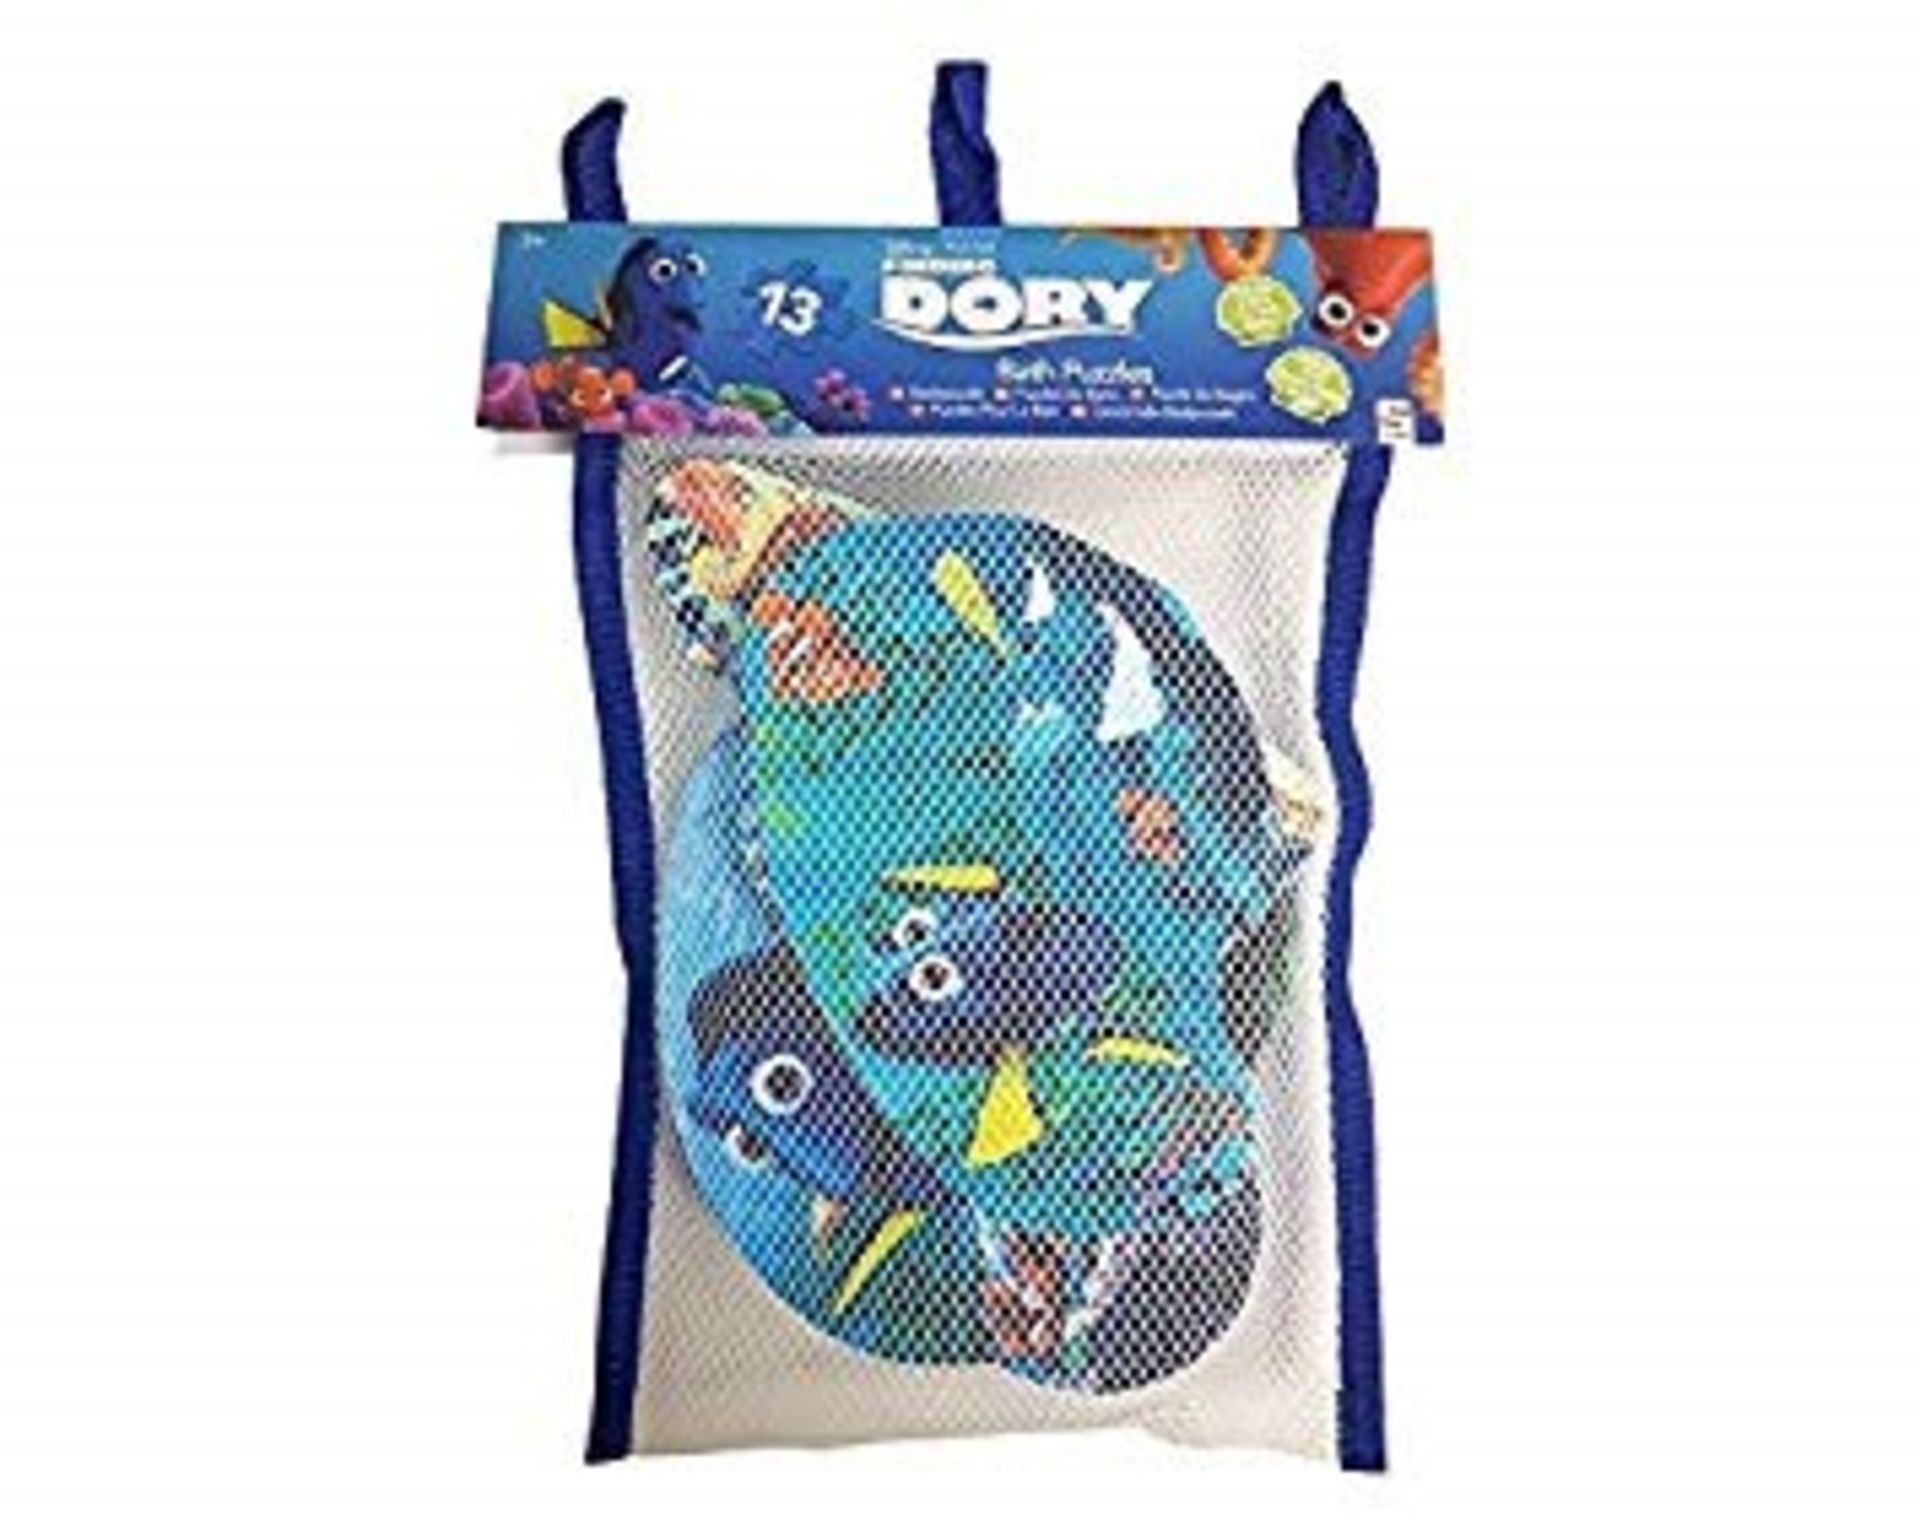 1 AS NEW FINDING DORY 13 PIECE BATH PUZZLE (VIEWING HIGHLY RECOMMENDED) - Image 2 of 2